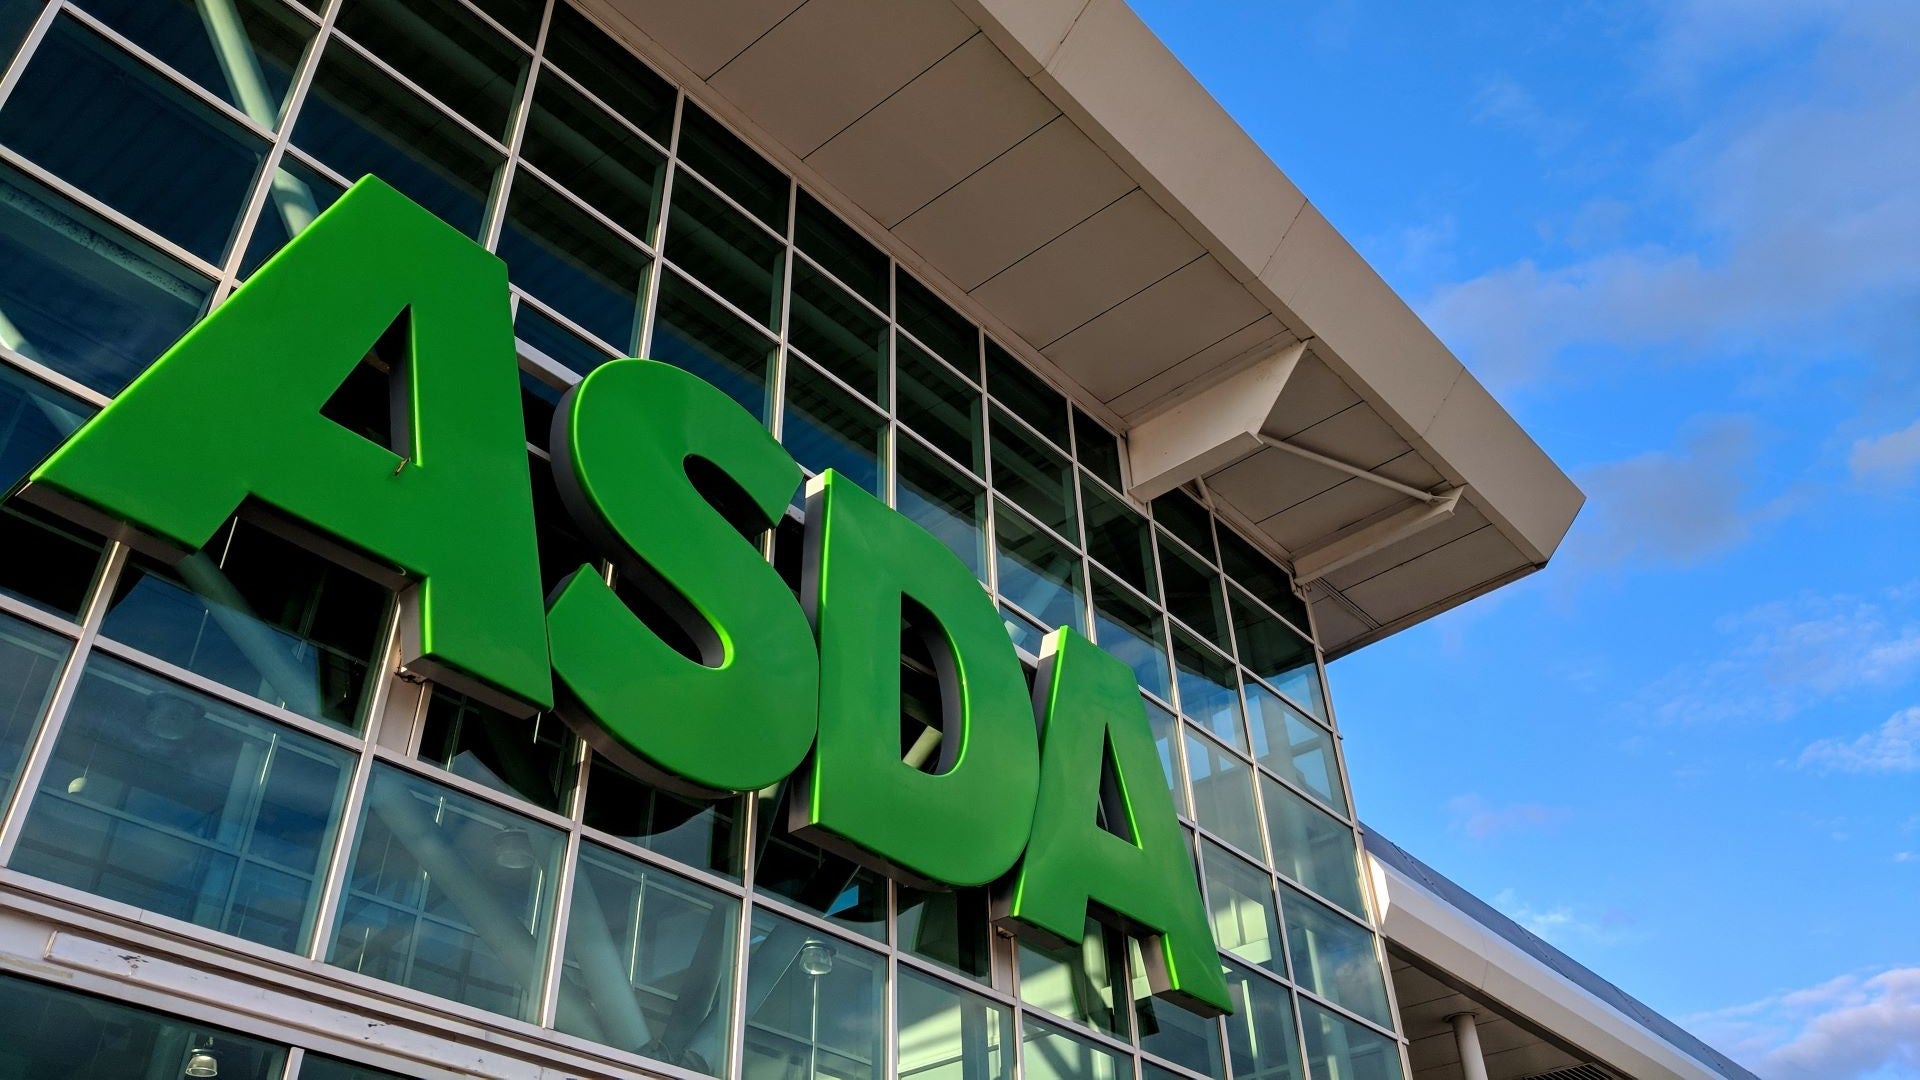 Asda collaborates with suppliers on sustainability push